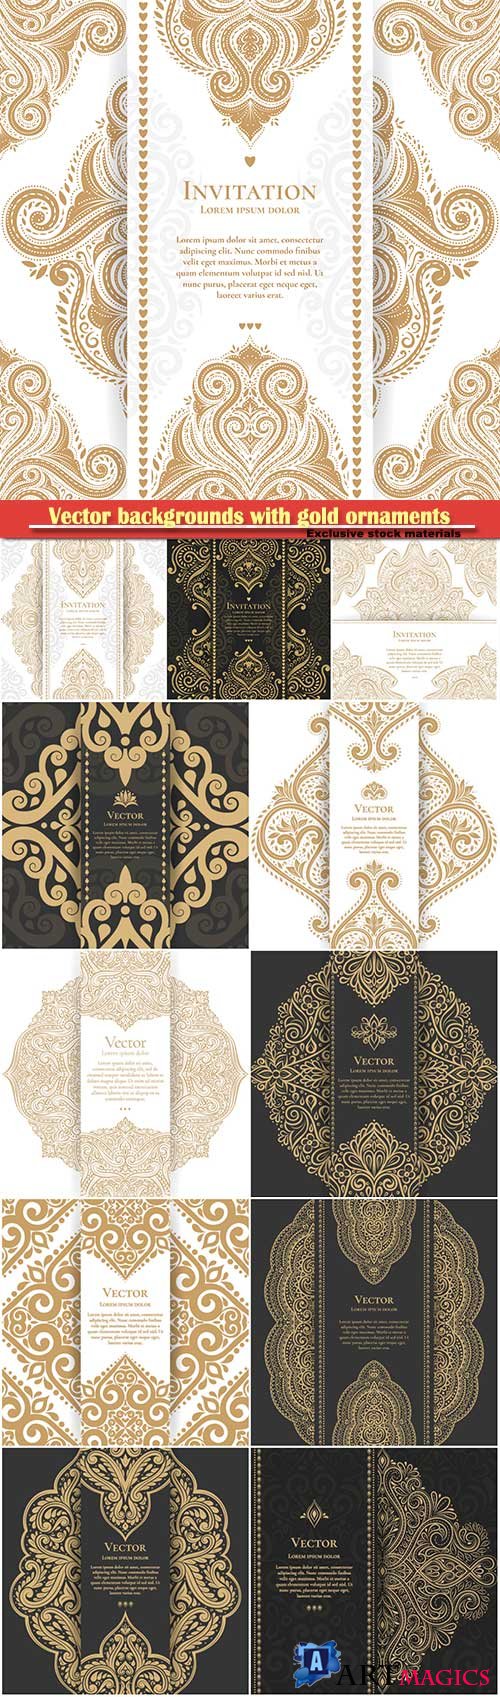 Vector vintage backgrounds with gold ornaments and patterns